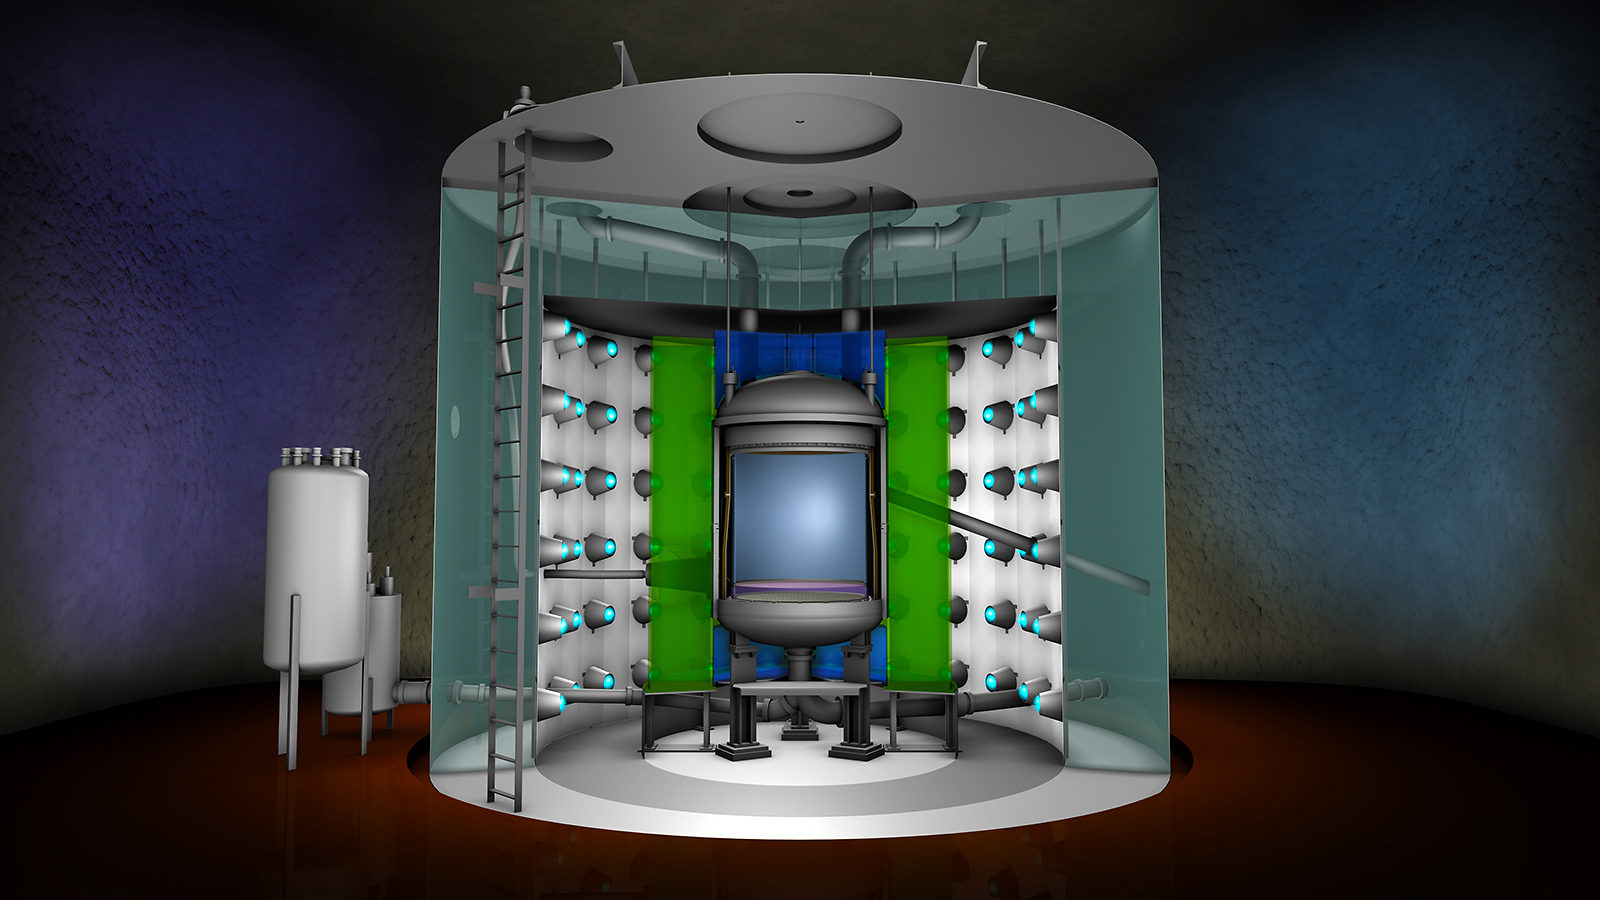 Illustration of a cut-away view of the inside of the LZ detector